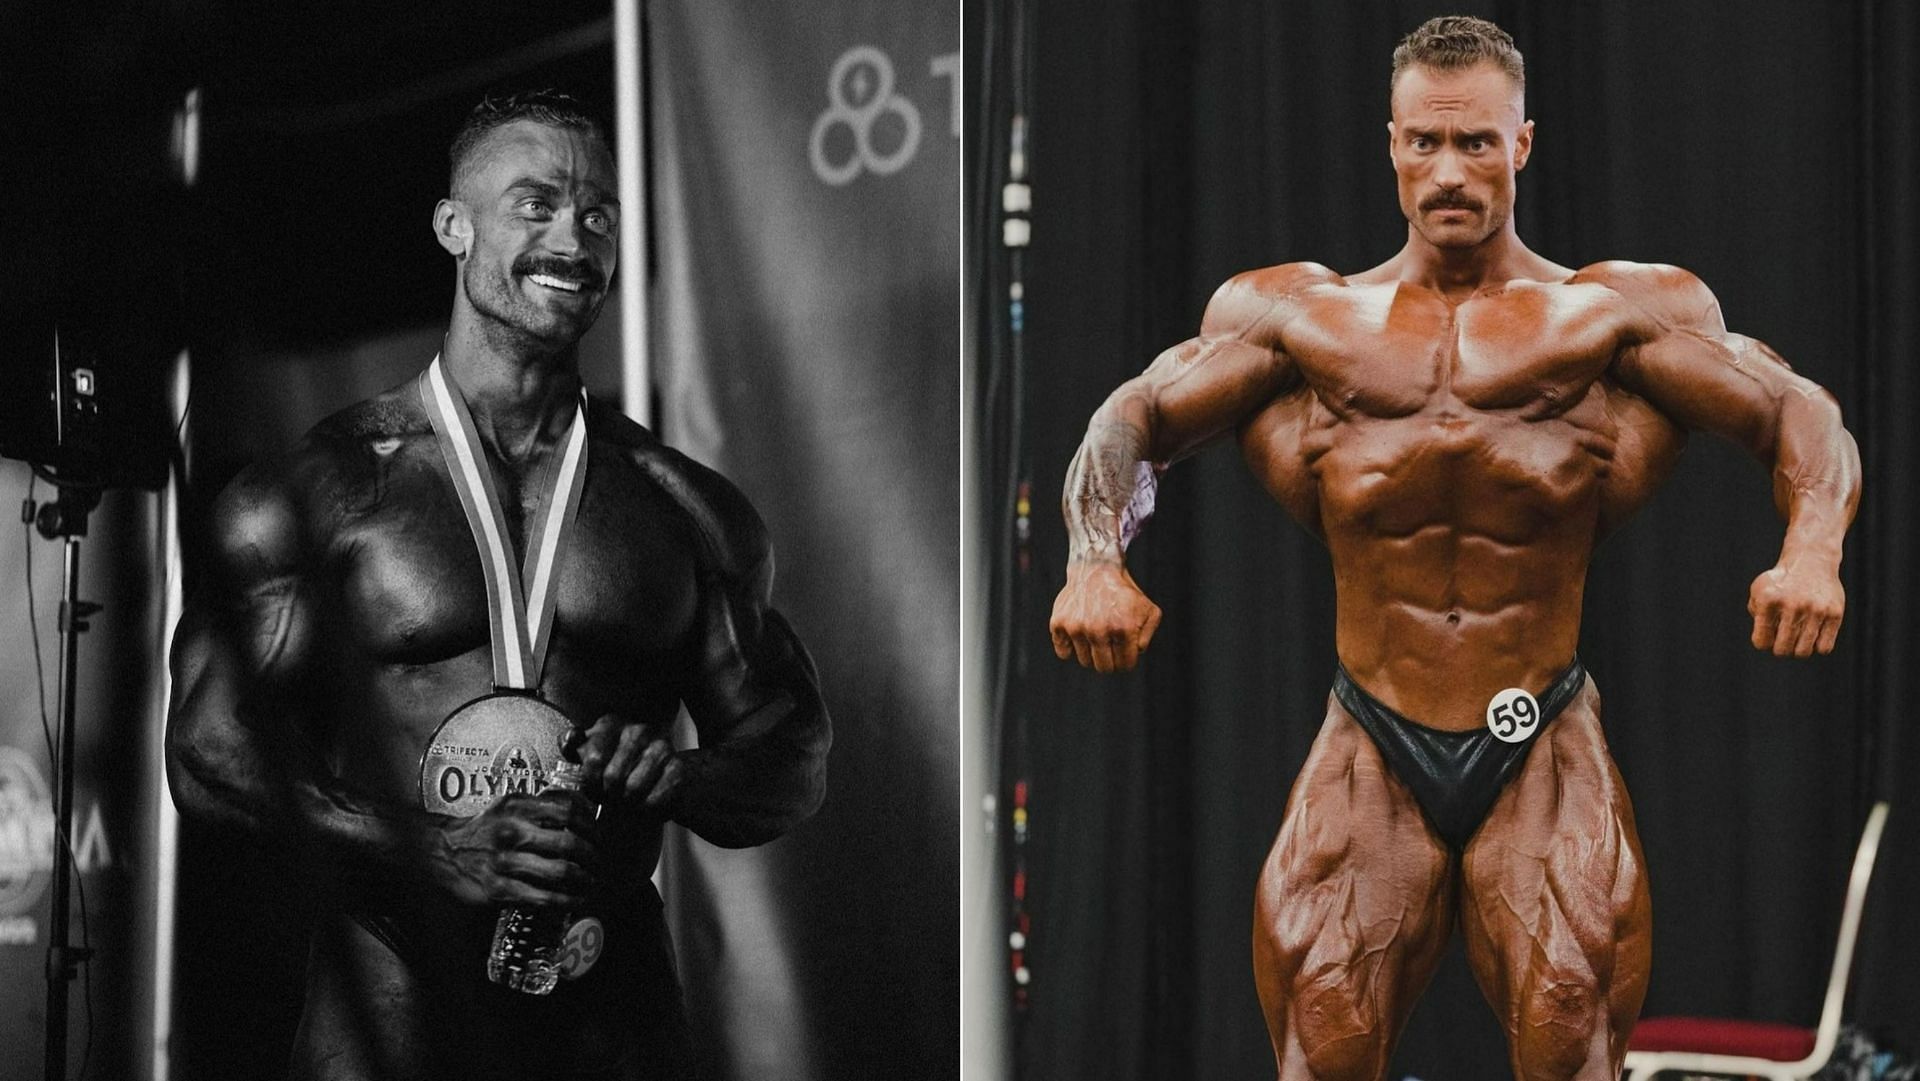 "I'm doing it light" Chris Bumstead is back to arms workout despite